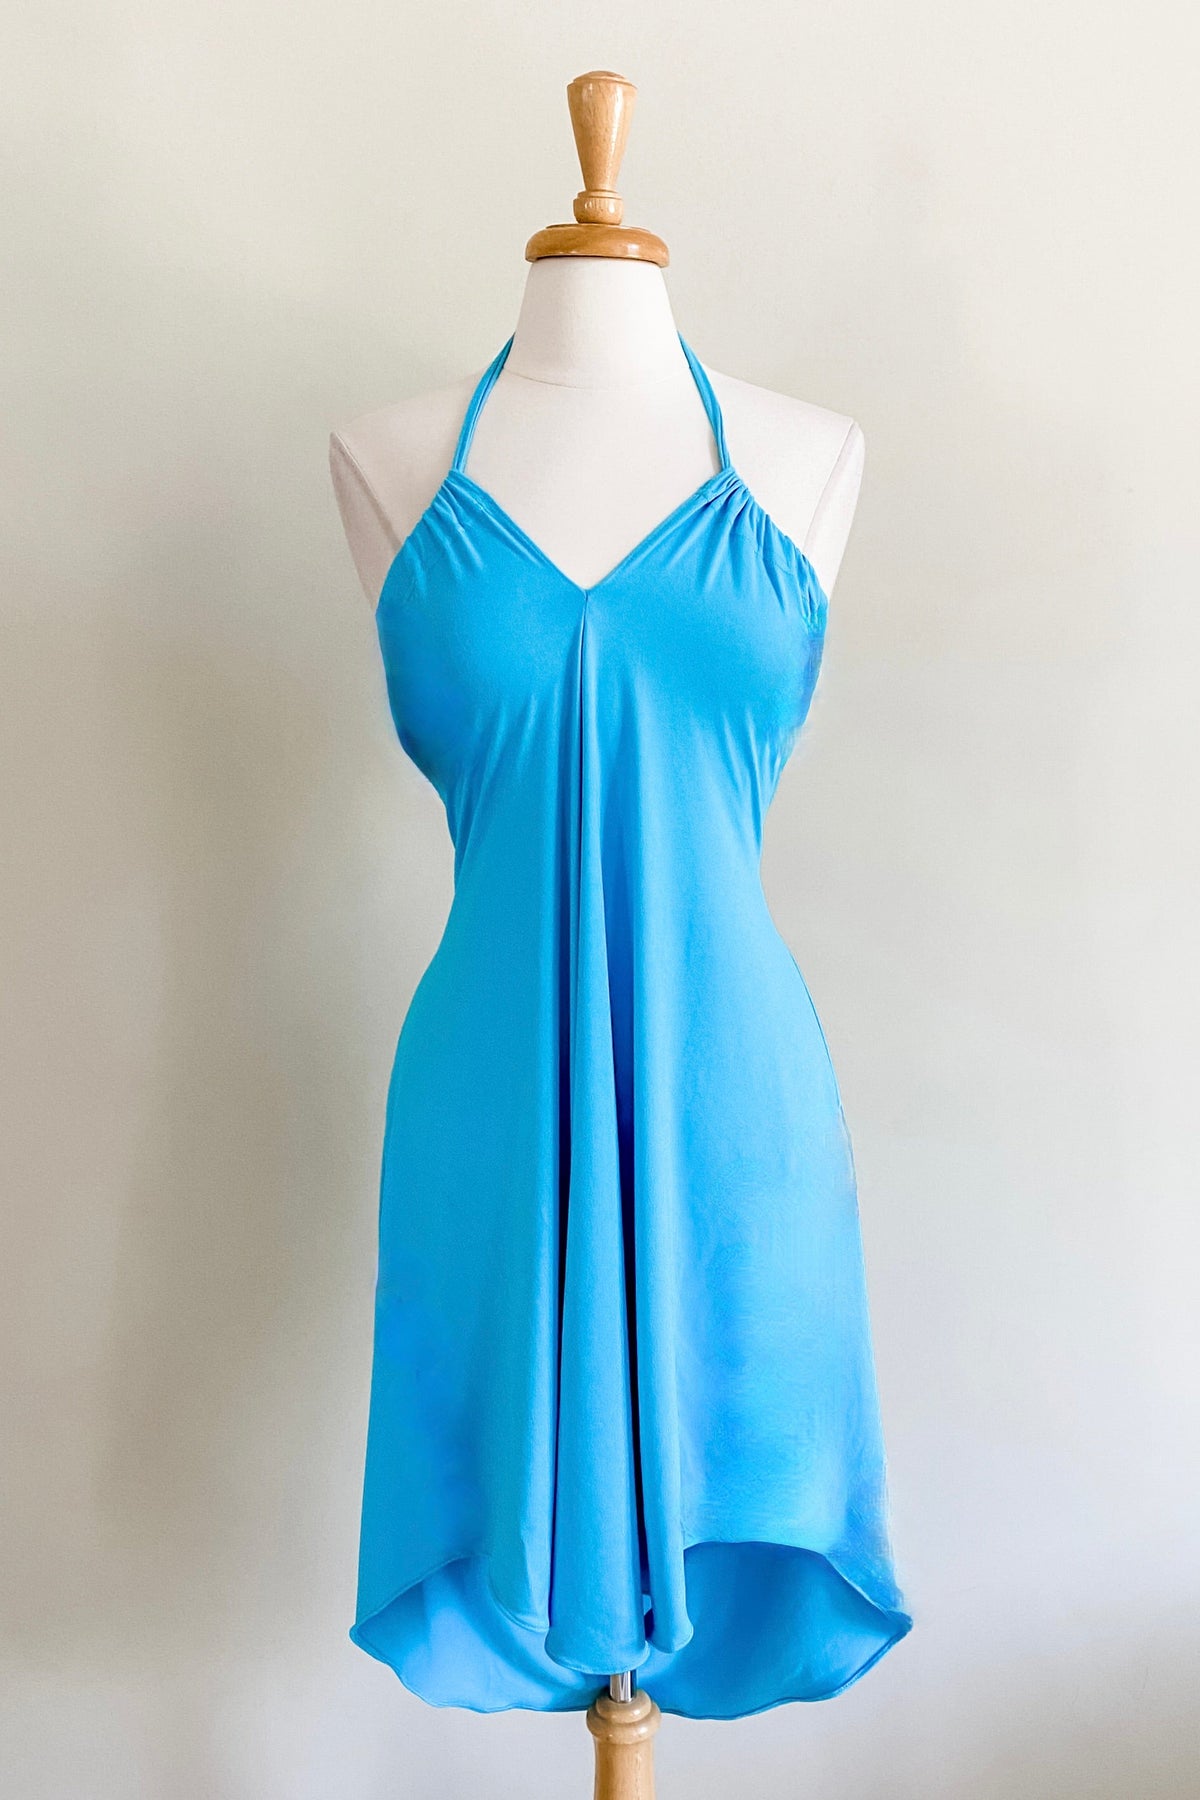 Diane Kroe Evermore Tunic (Turquoise) - Warm Weather Capsule Collection